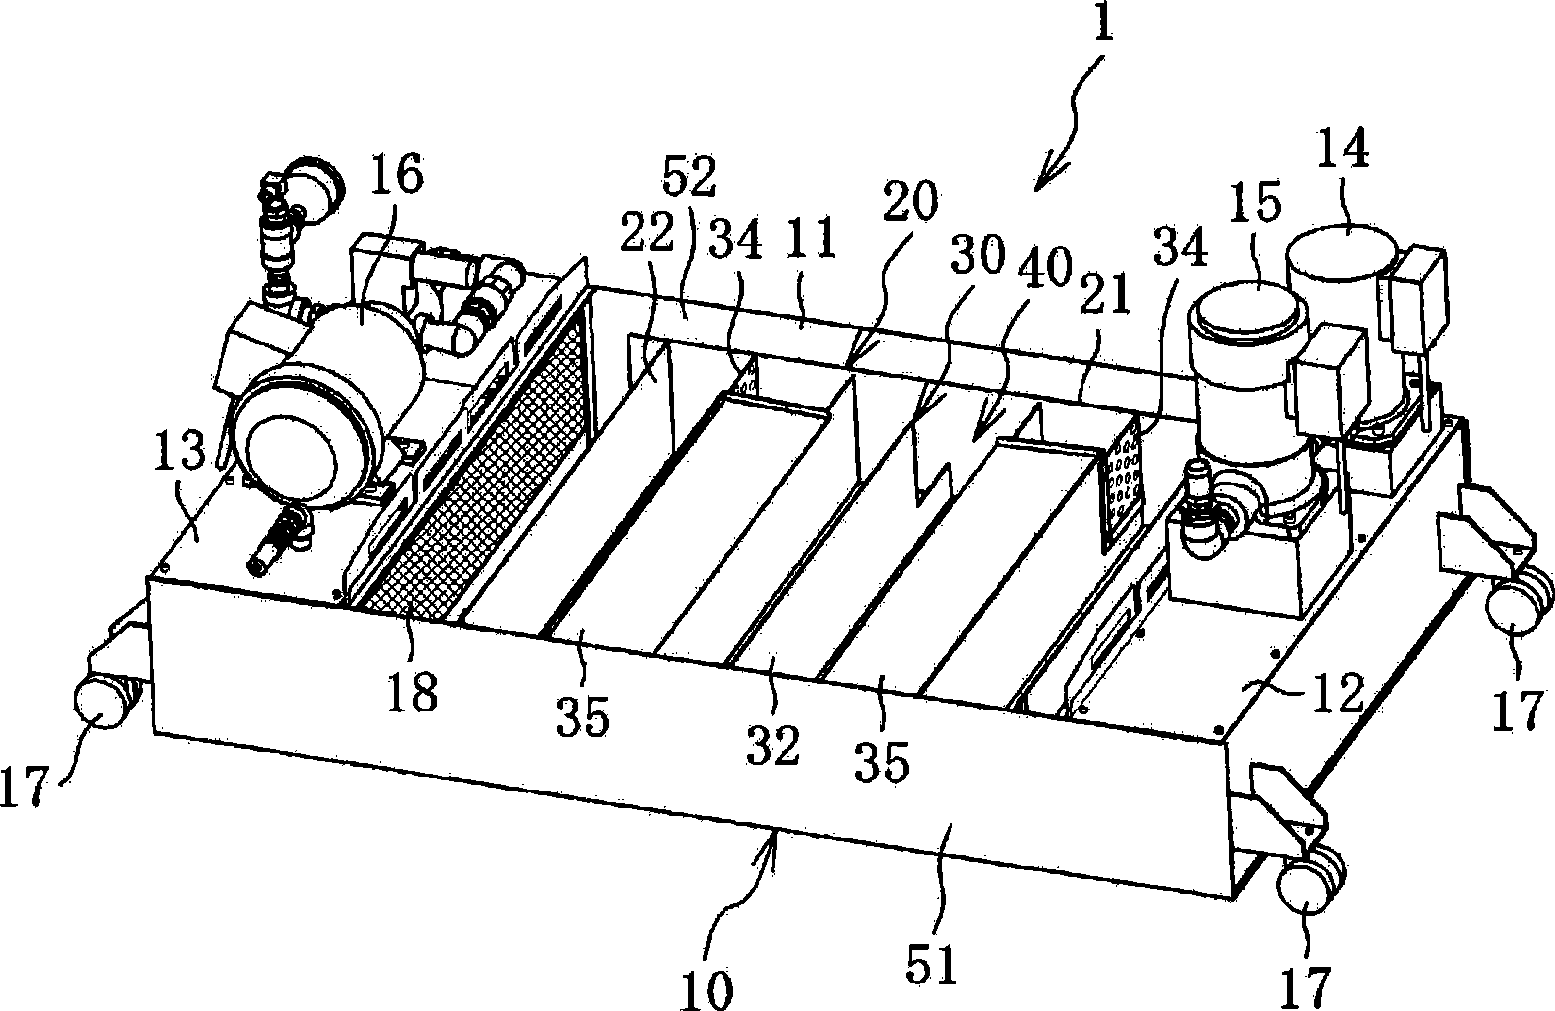 Device for filtering cutting fluid